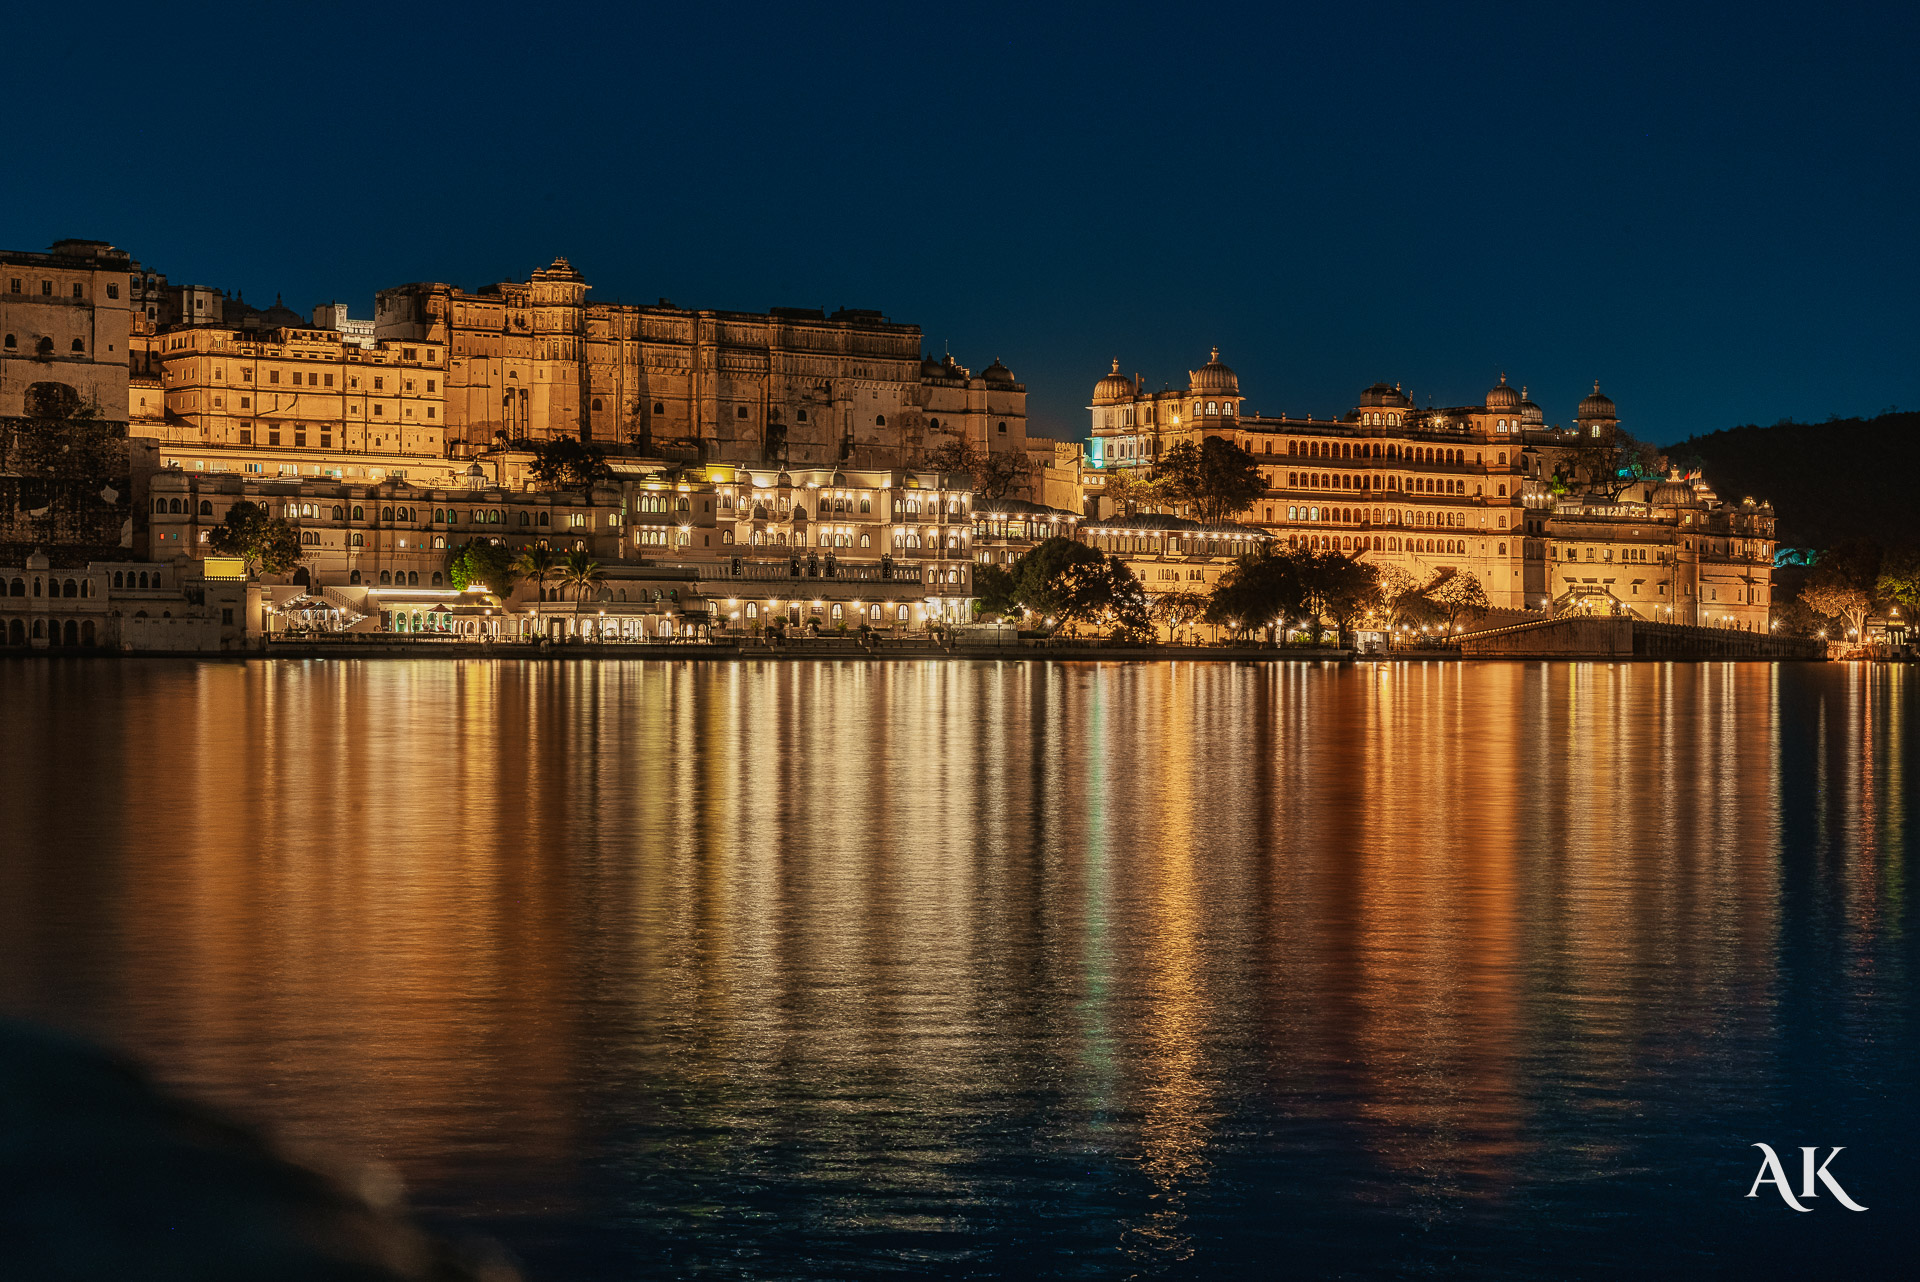 Udaipur – The city of Lakes